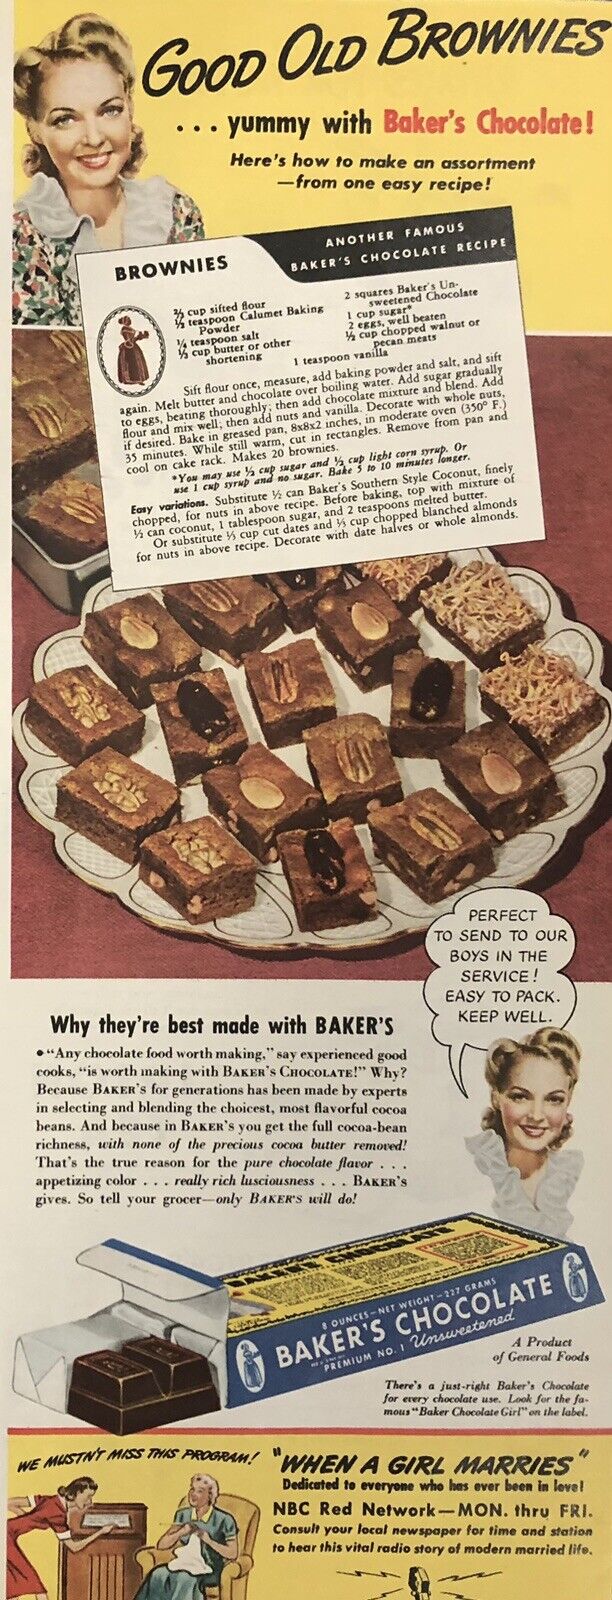 1941 BAKER\'S CHOCOLATE w/Brownie recipe: Color ad clipping ~ Send to servicemen